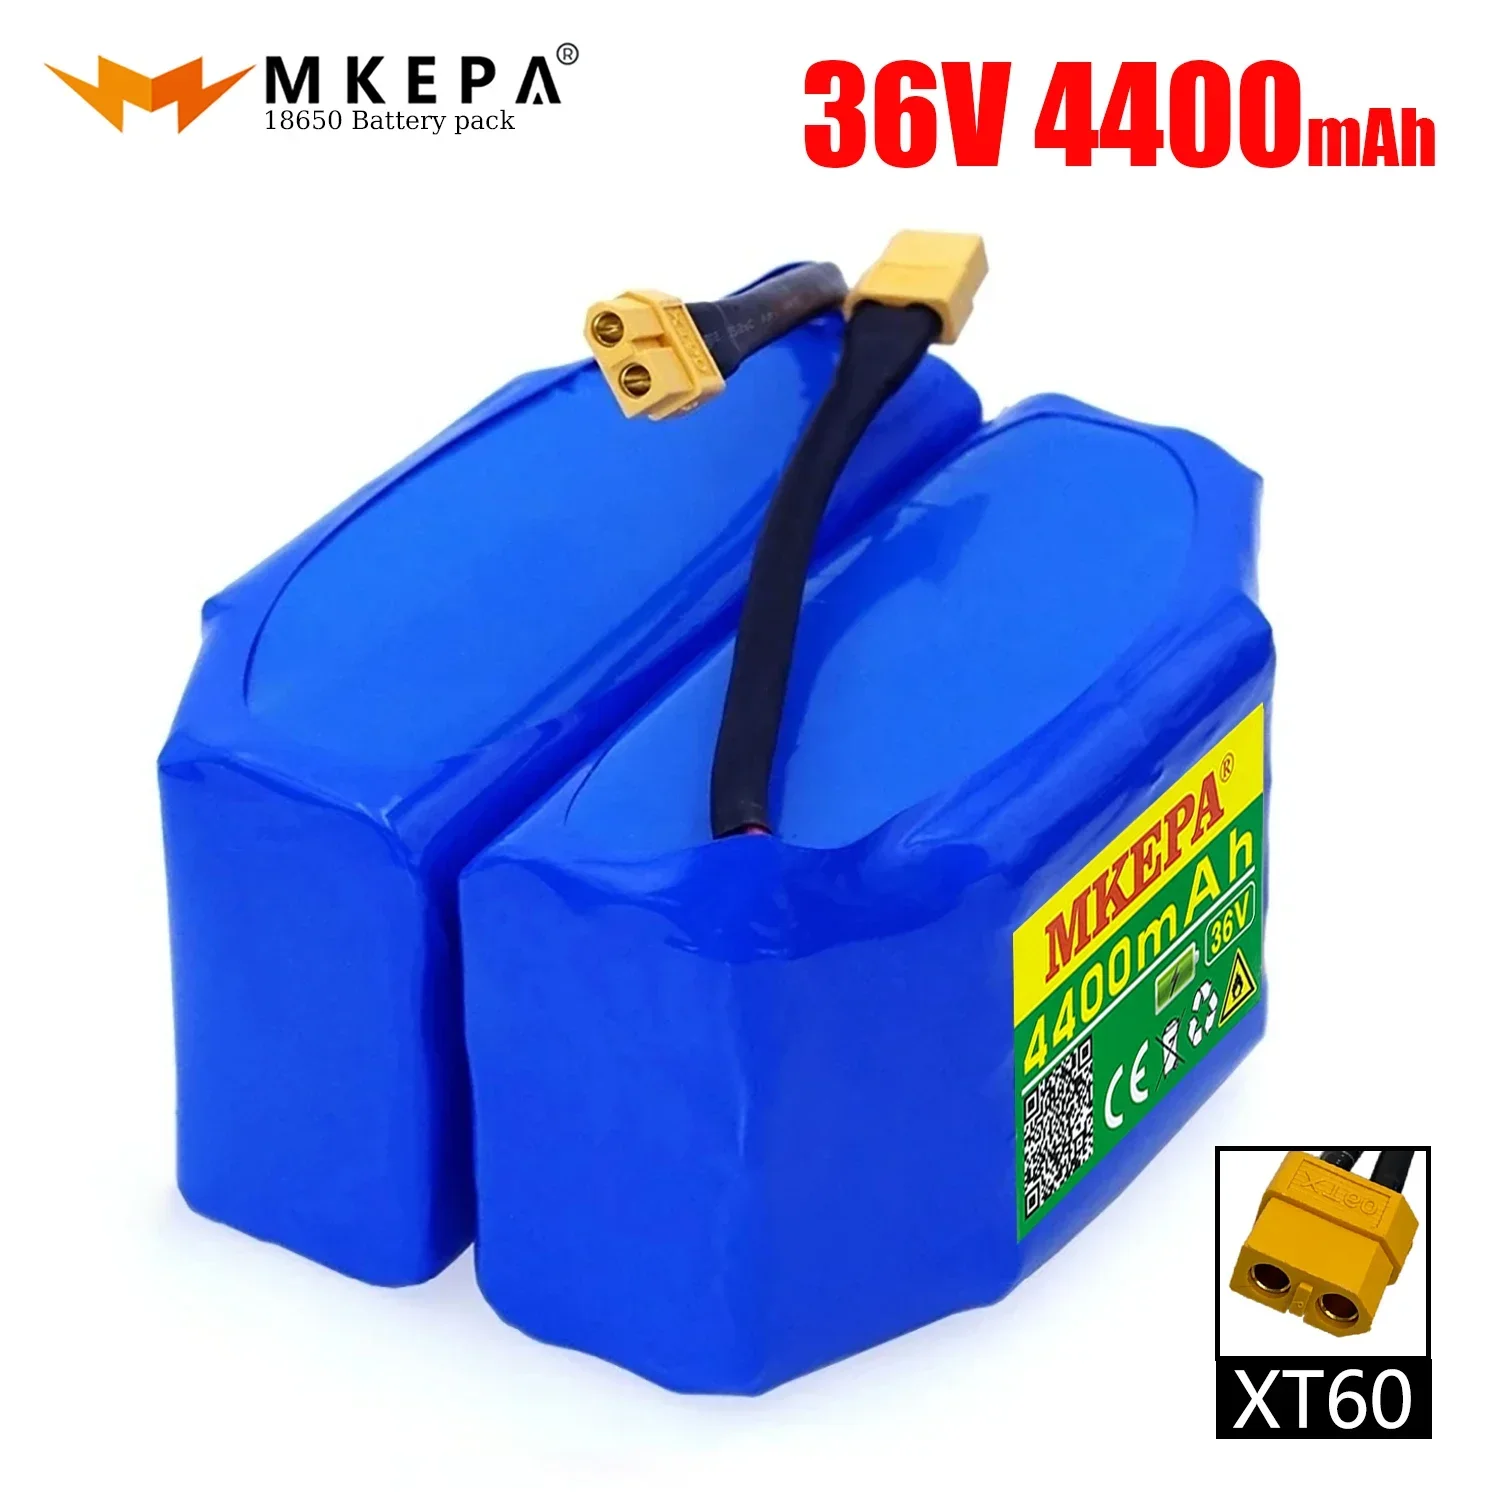 

Mkepa 36V 10S2P 4400mAh 36v Electric Scooter Battery Lithium-ion 18650 42v 18650 Battery Pack Scooter Twist Car Battery